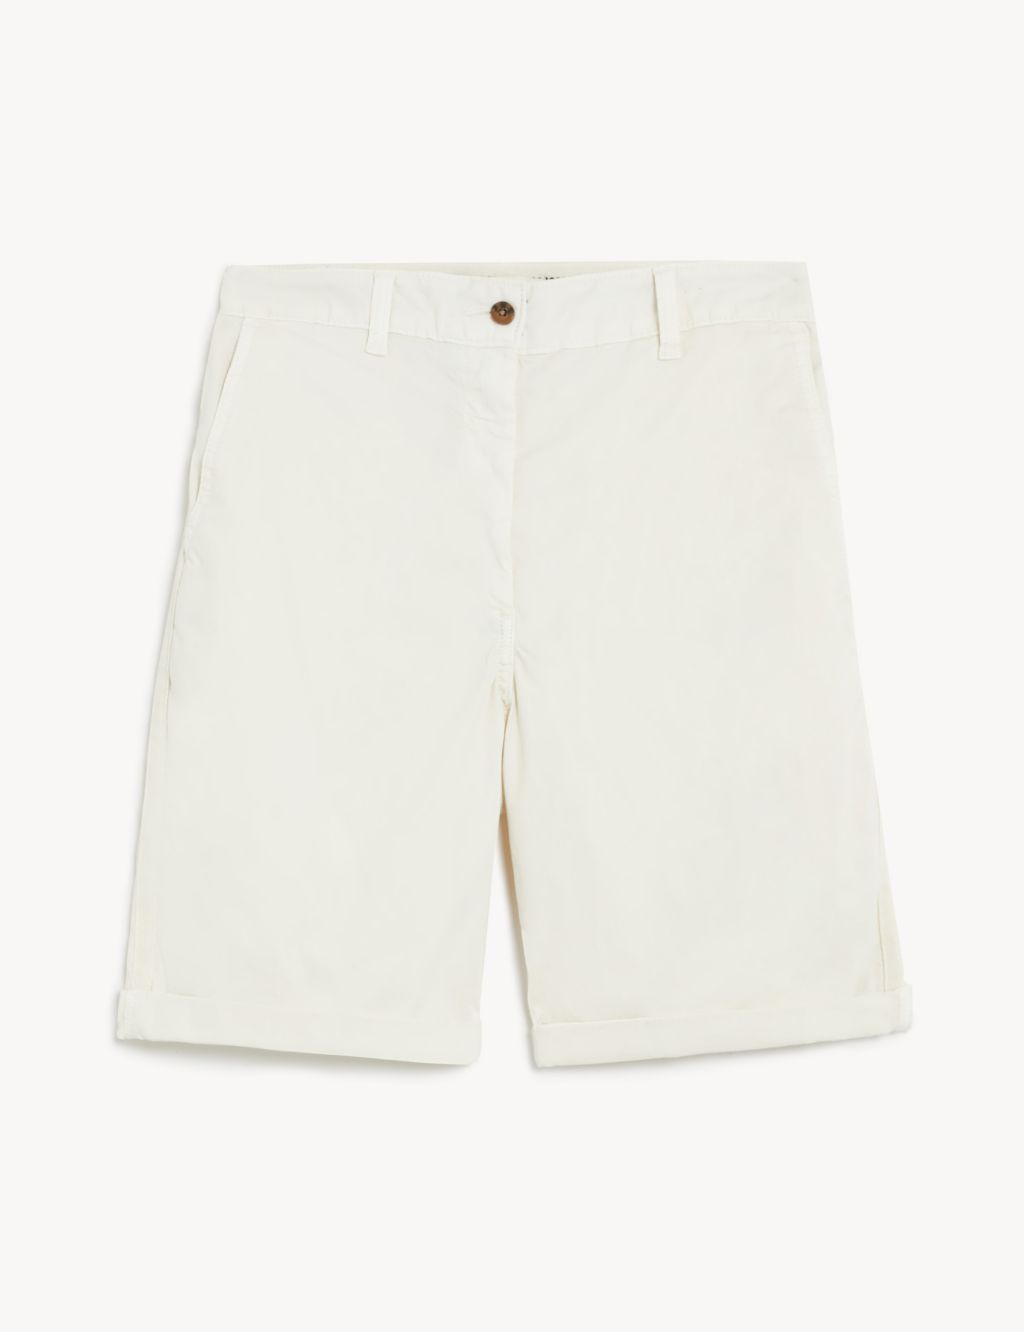 Cotton Rich Tea Dyed Chino Shorts image 2